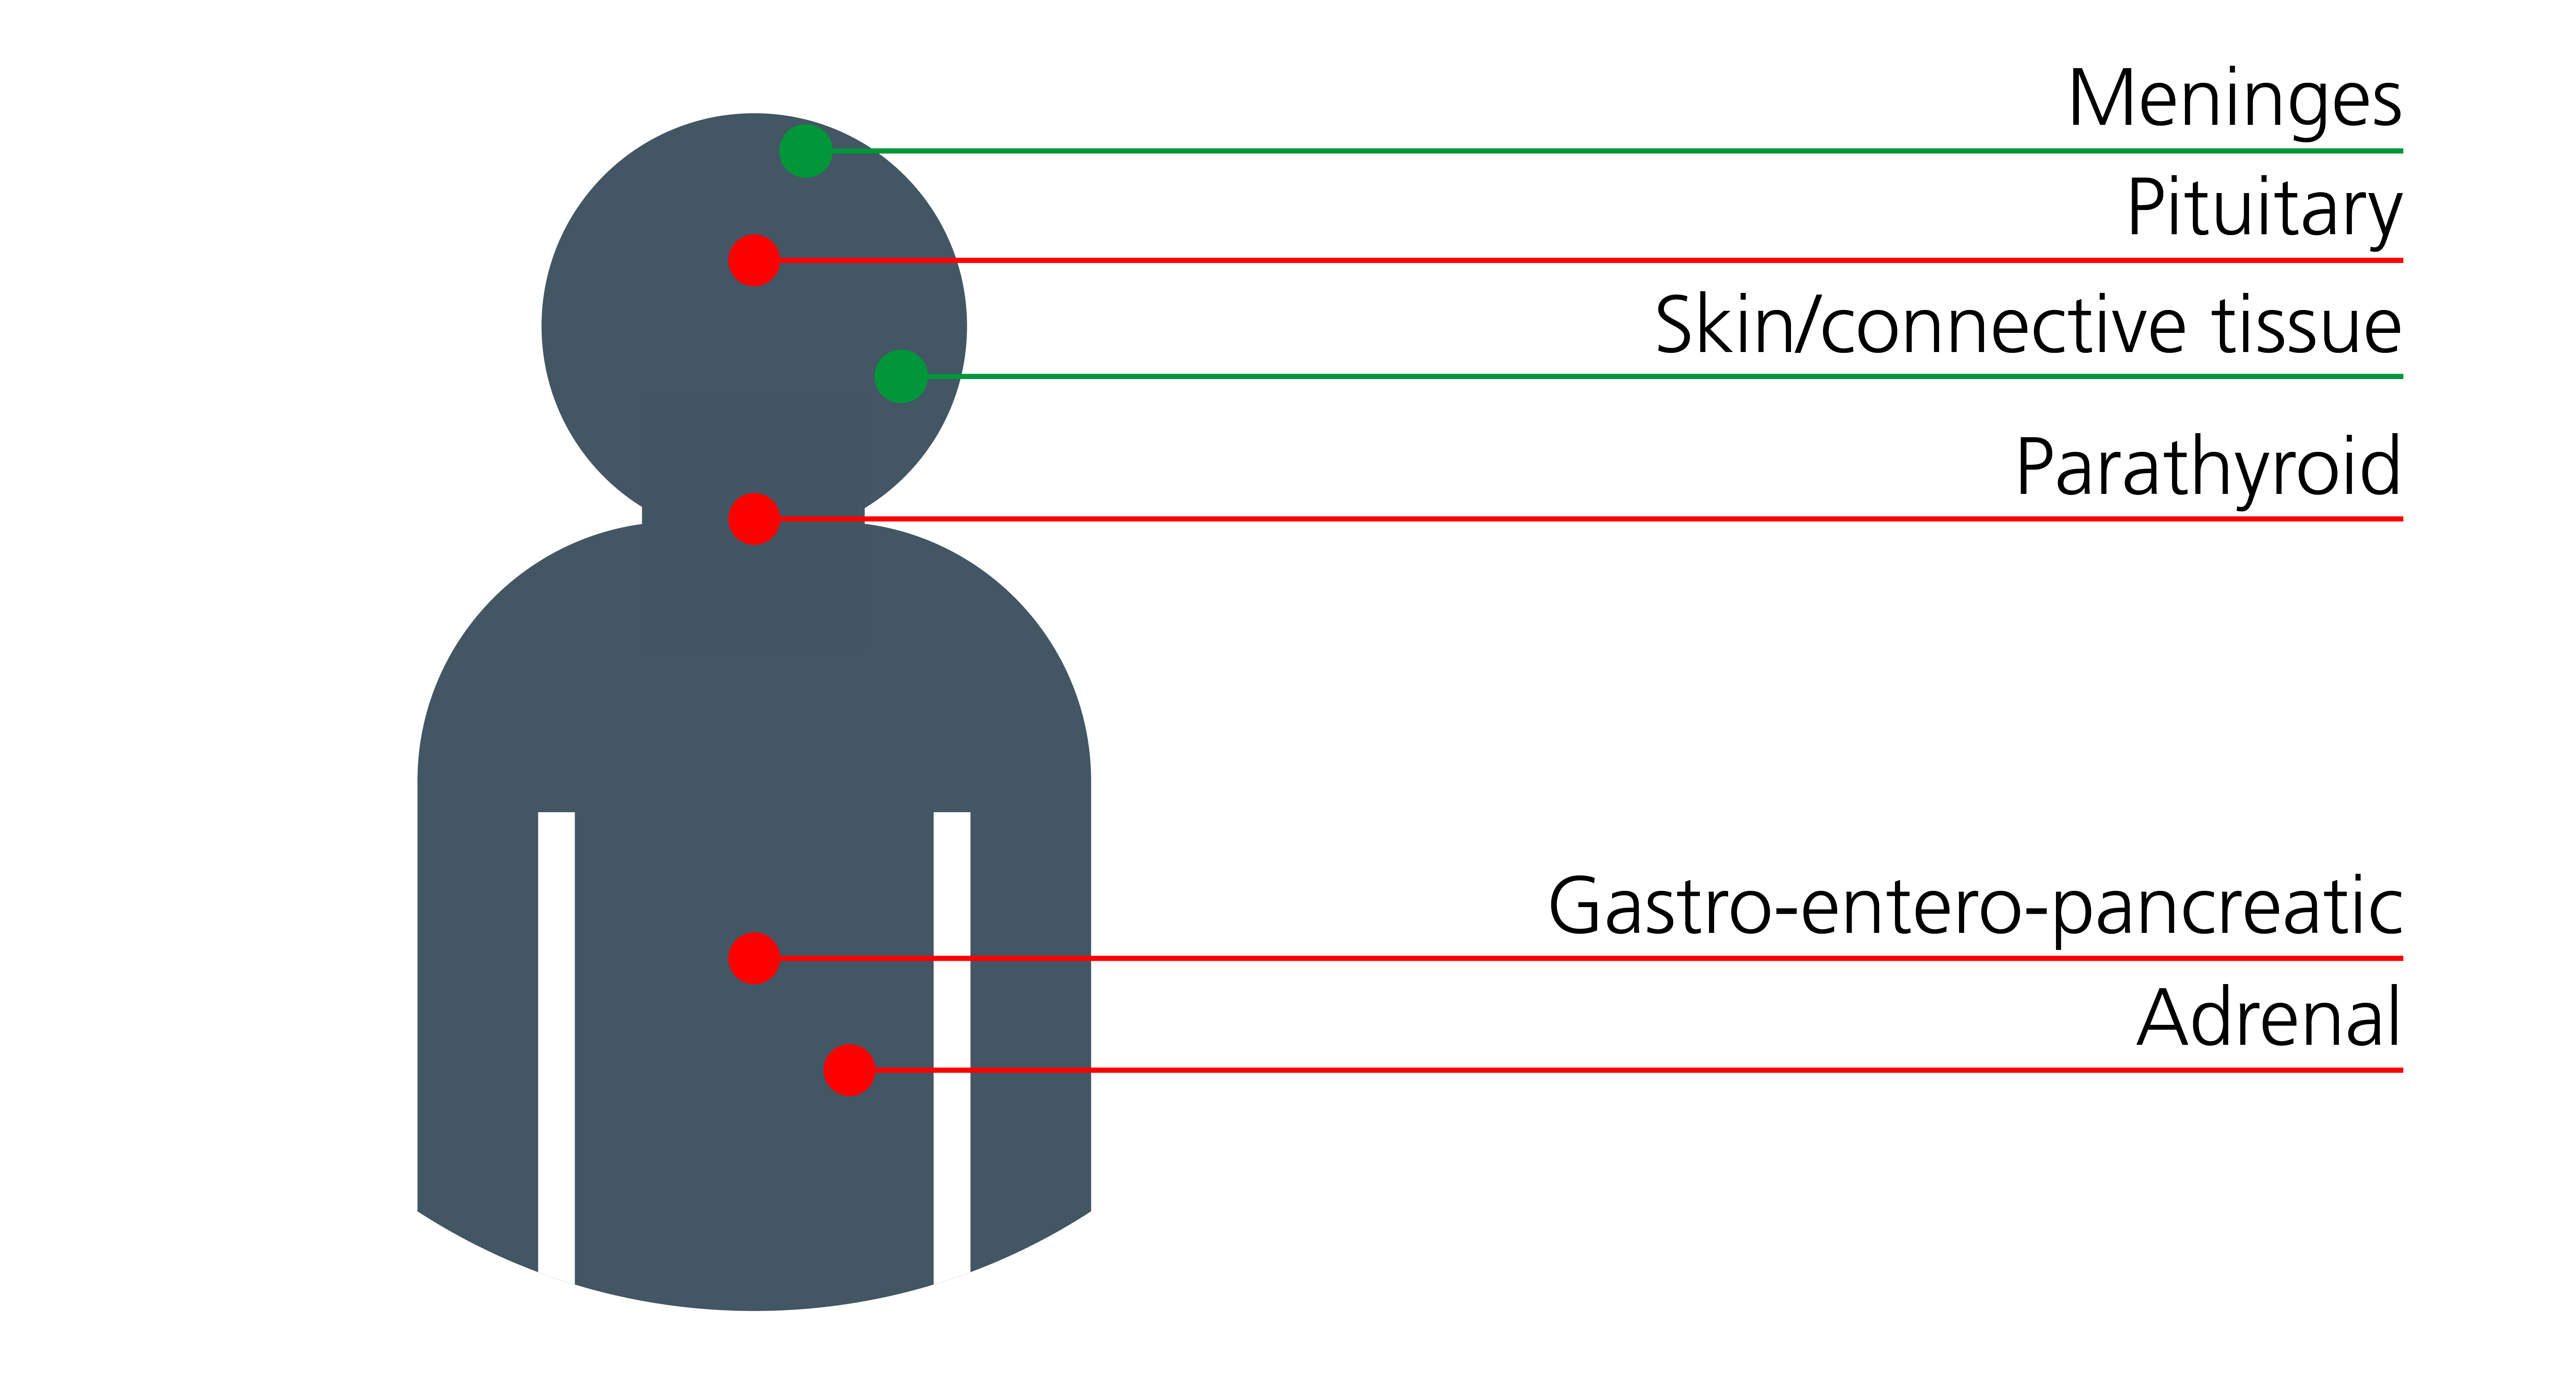 A basic human shape with red and green dots marking the place where tumours develop in MEN1 patients. The red dots mark pituitary, parathyroid, gastro-entero-pancreatic and adrenal tumours, and the green dots mark meninges and skin/connective tissue tumours.